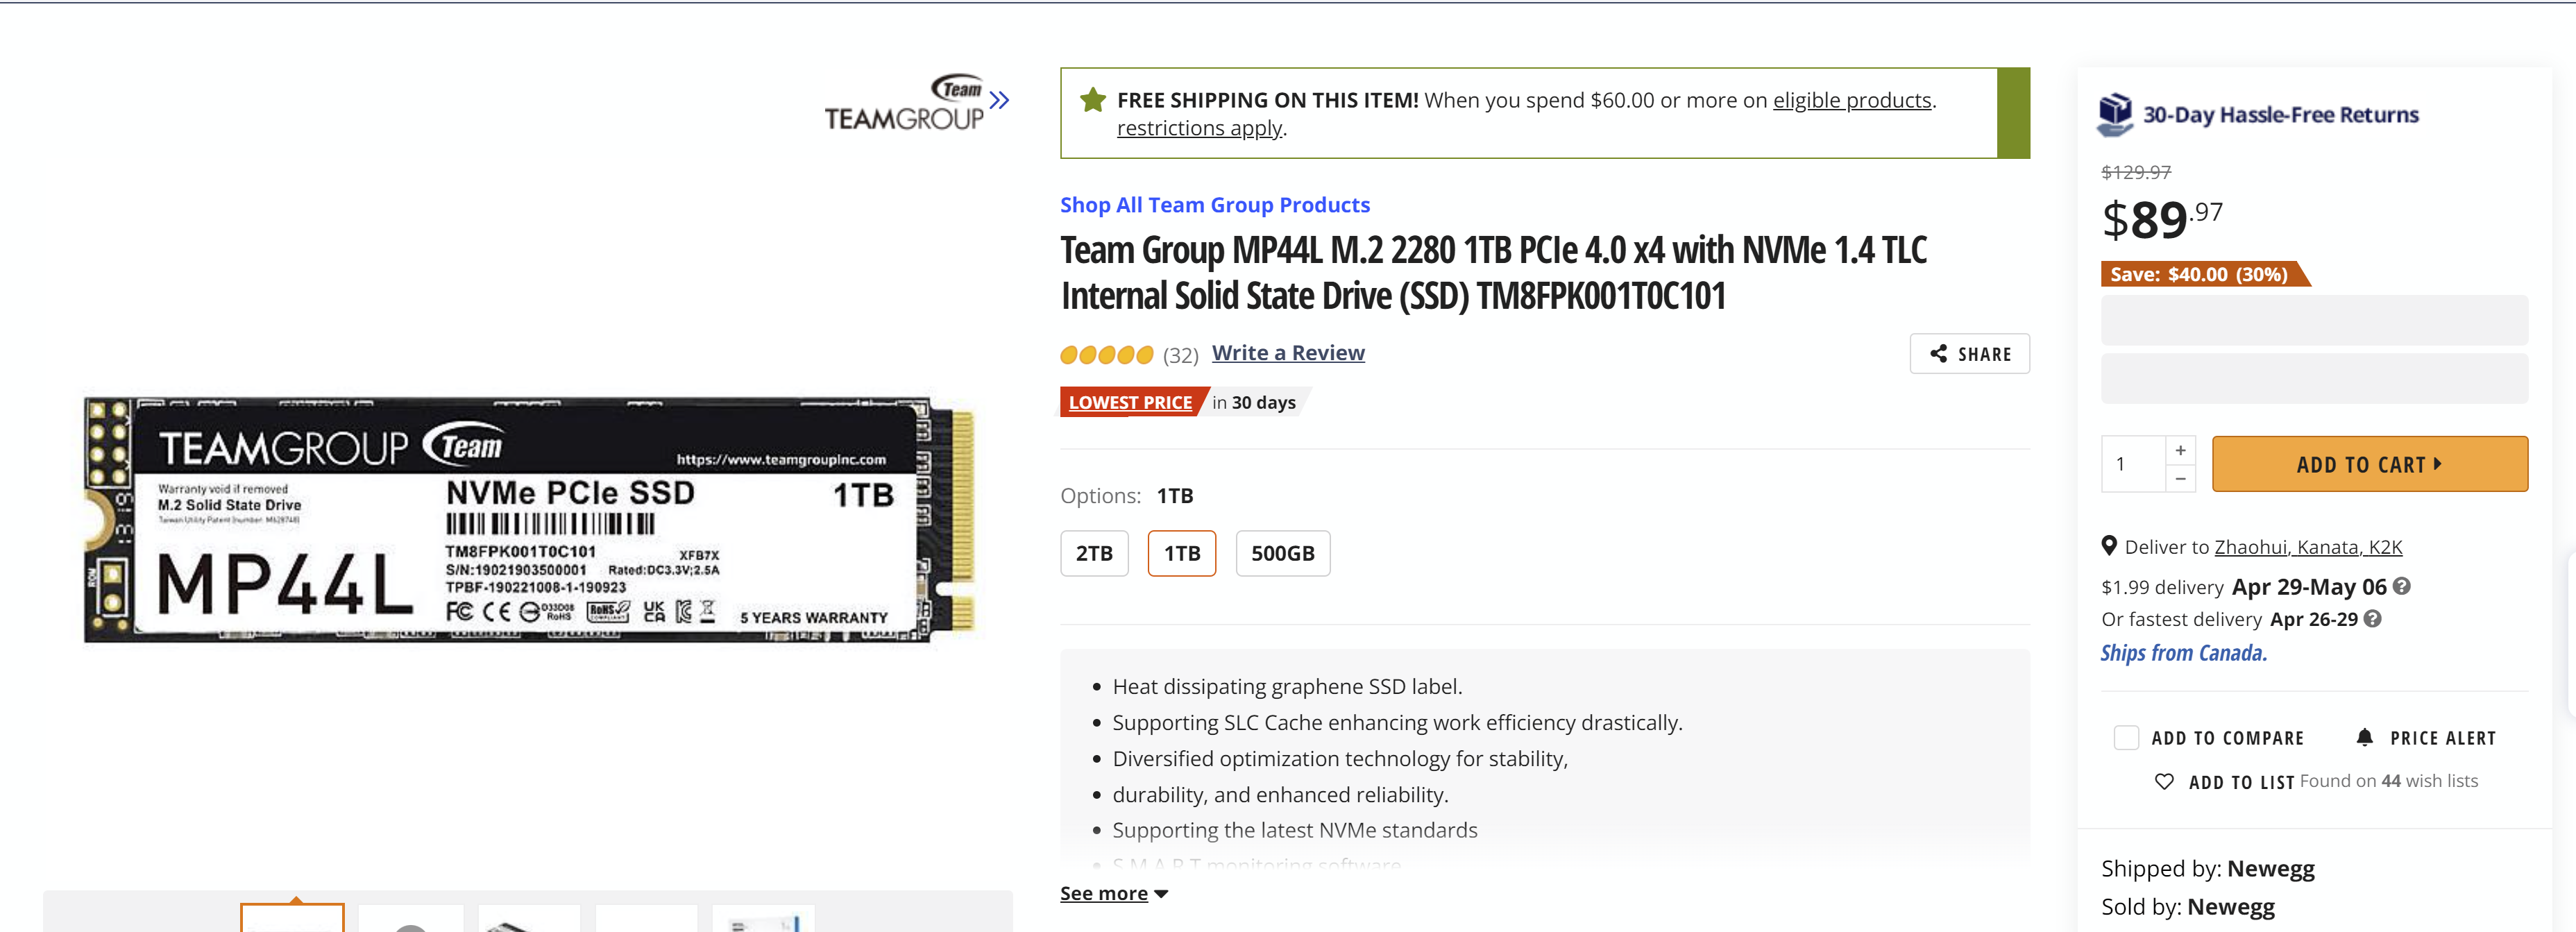 Team Group MP44L M.2 2280 1TB PCIe 4.0 x4 with NVMe 1.4 TLC Internal Solid State Drive (SSD) TM8FPK001T0C101